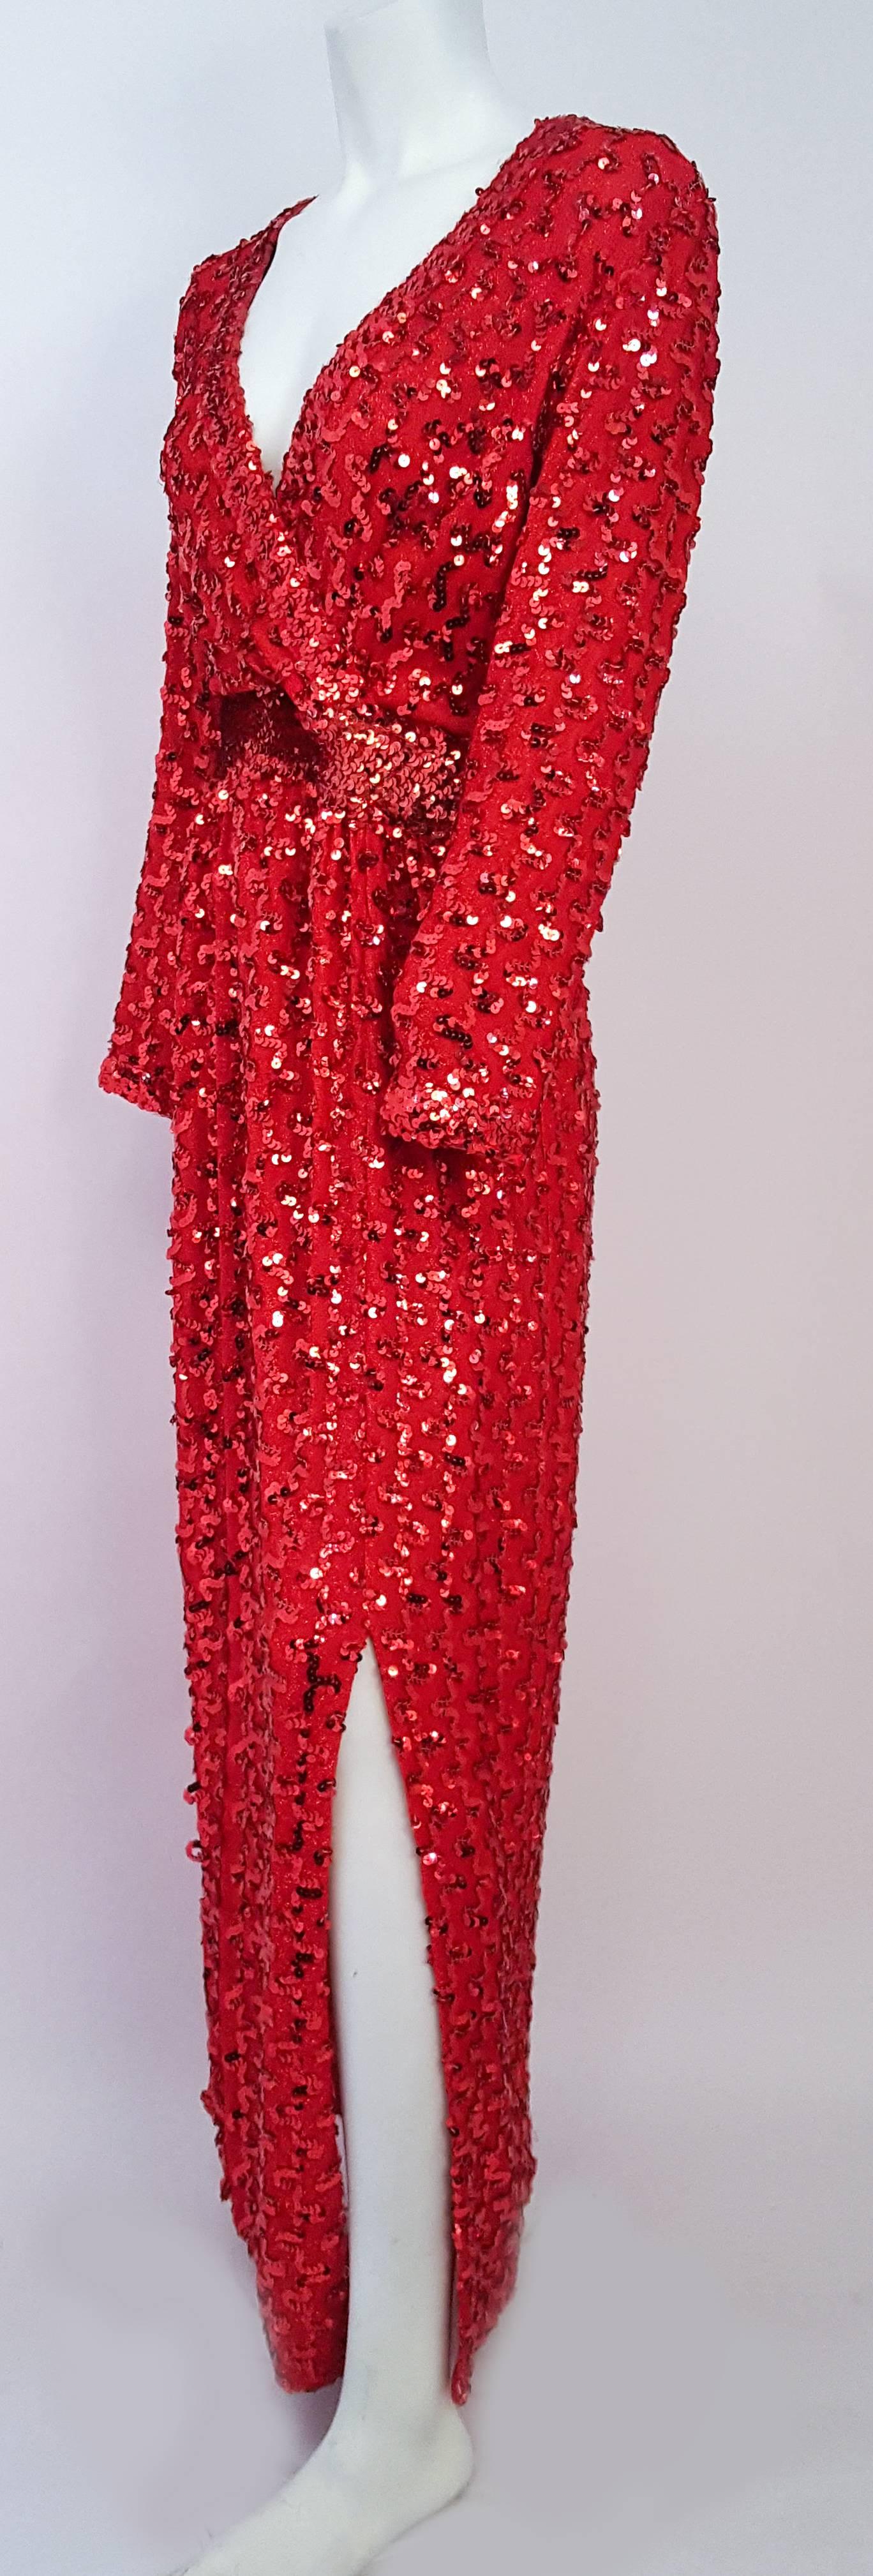 70s Lilli Diamond Red Sequin Dress. All-over red sequins on stretch jersey with red lamé threads. Faux sequin belt detail. Back zip closure. One side slit.